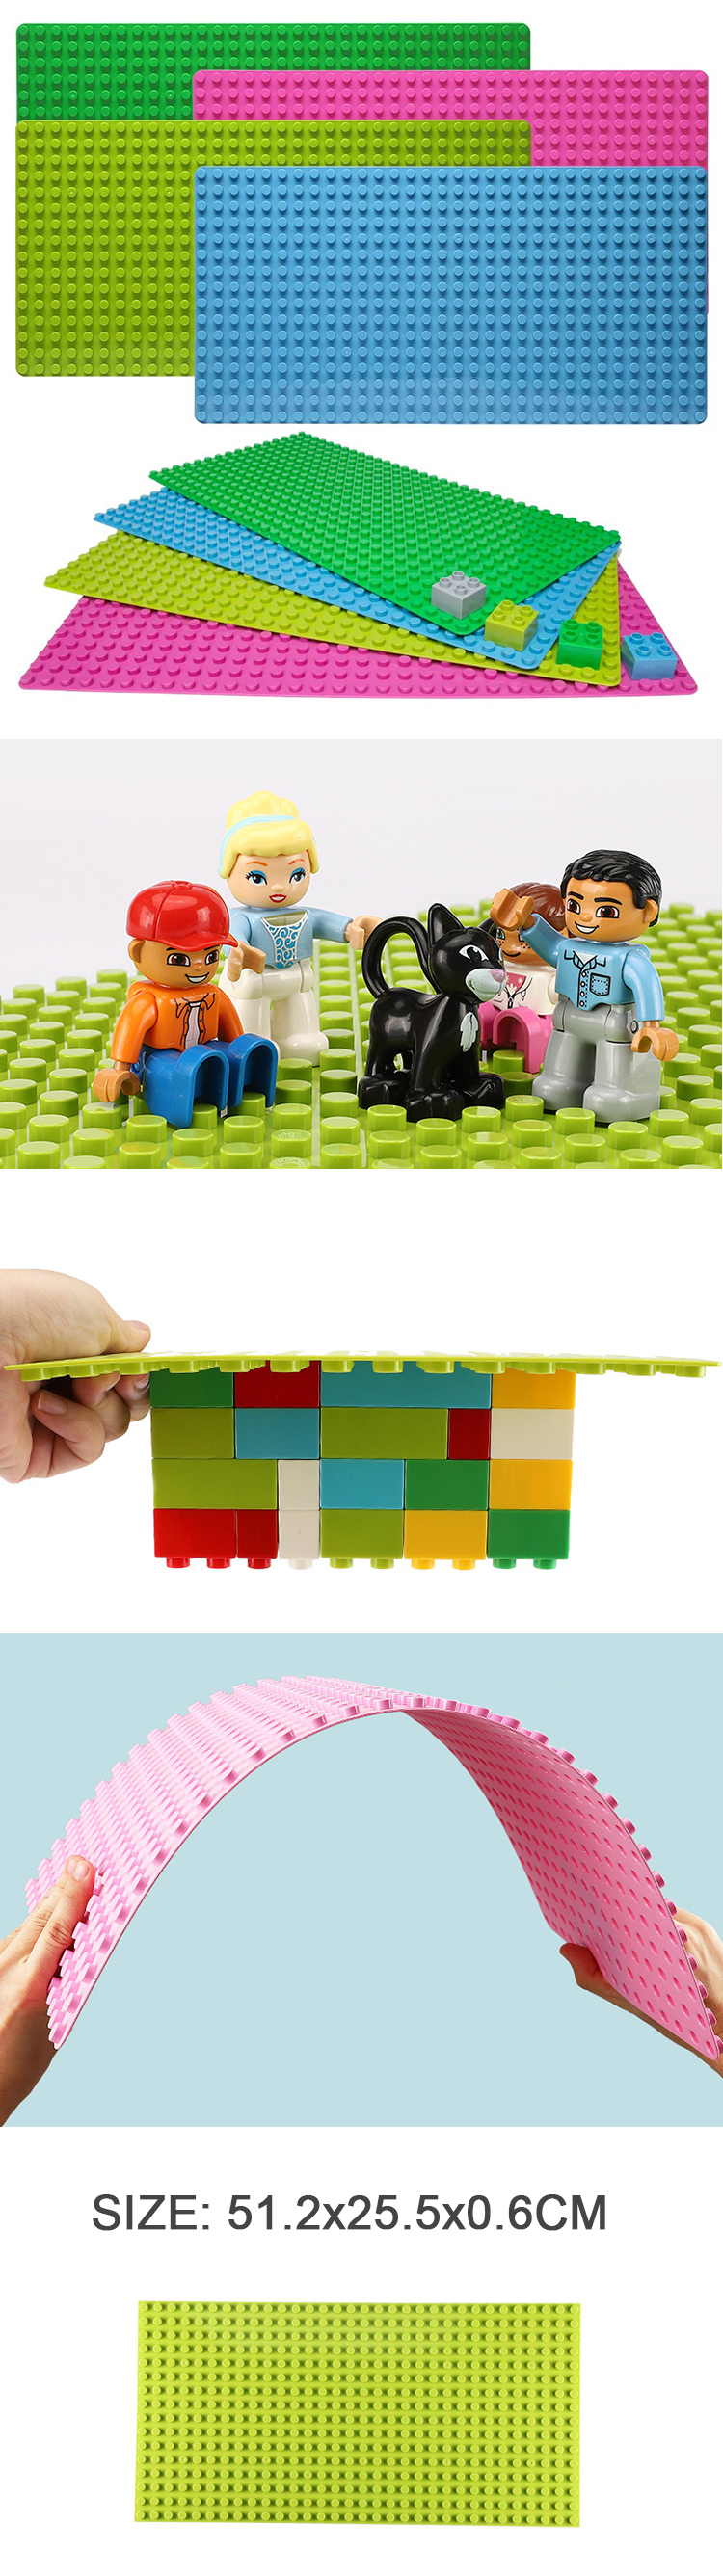 WOMA TOYS Compatible with All Major Brands base plate Size 32*16 dot Classic Baseplates Big Building Brick Base Plate Toy Kit